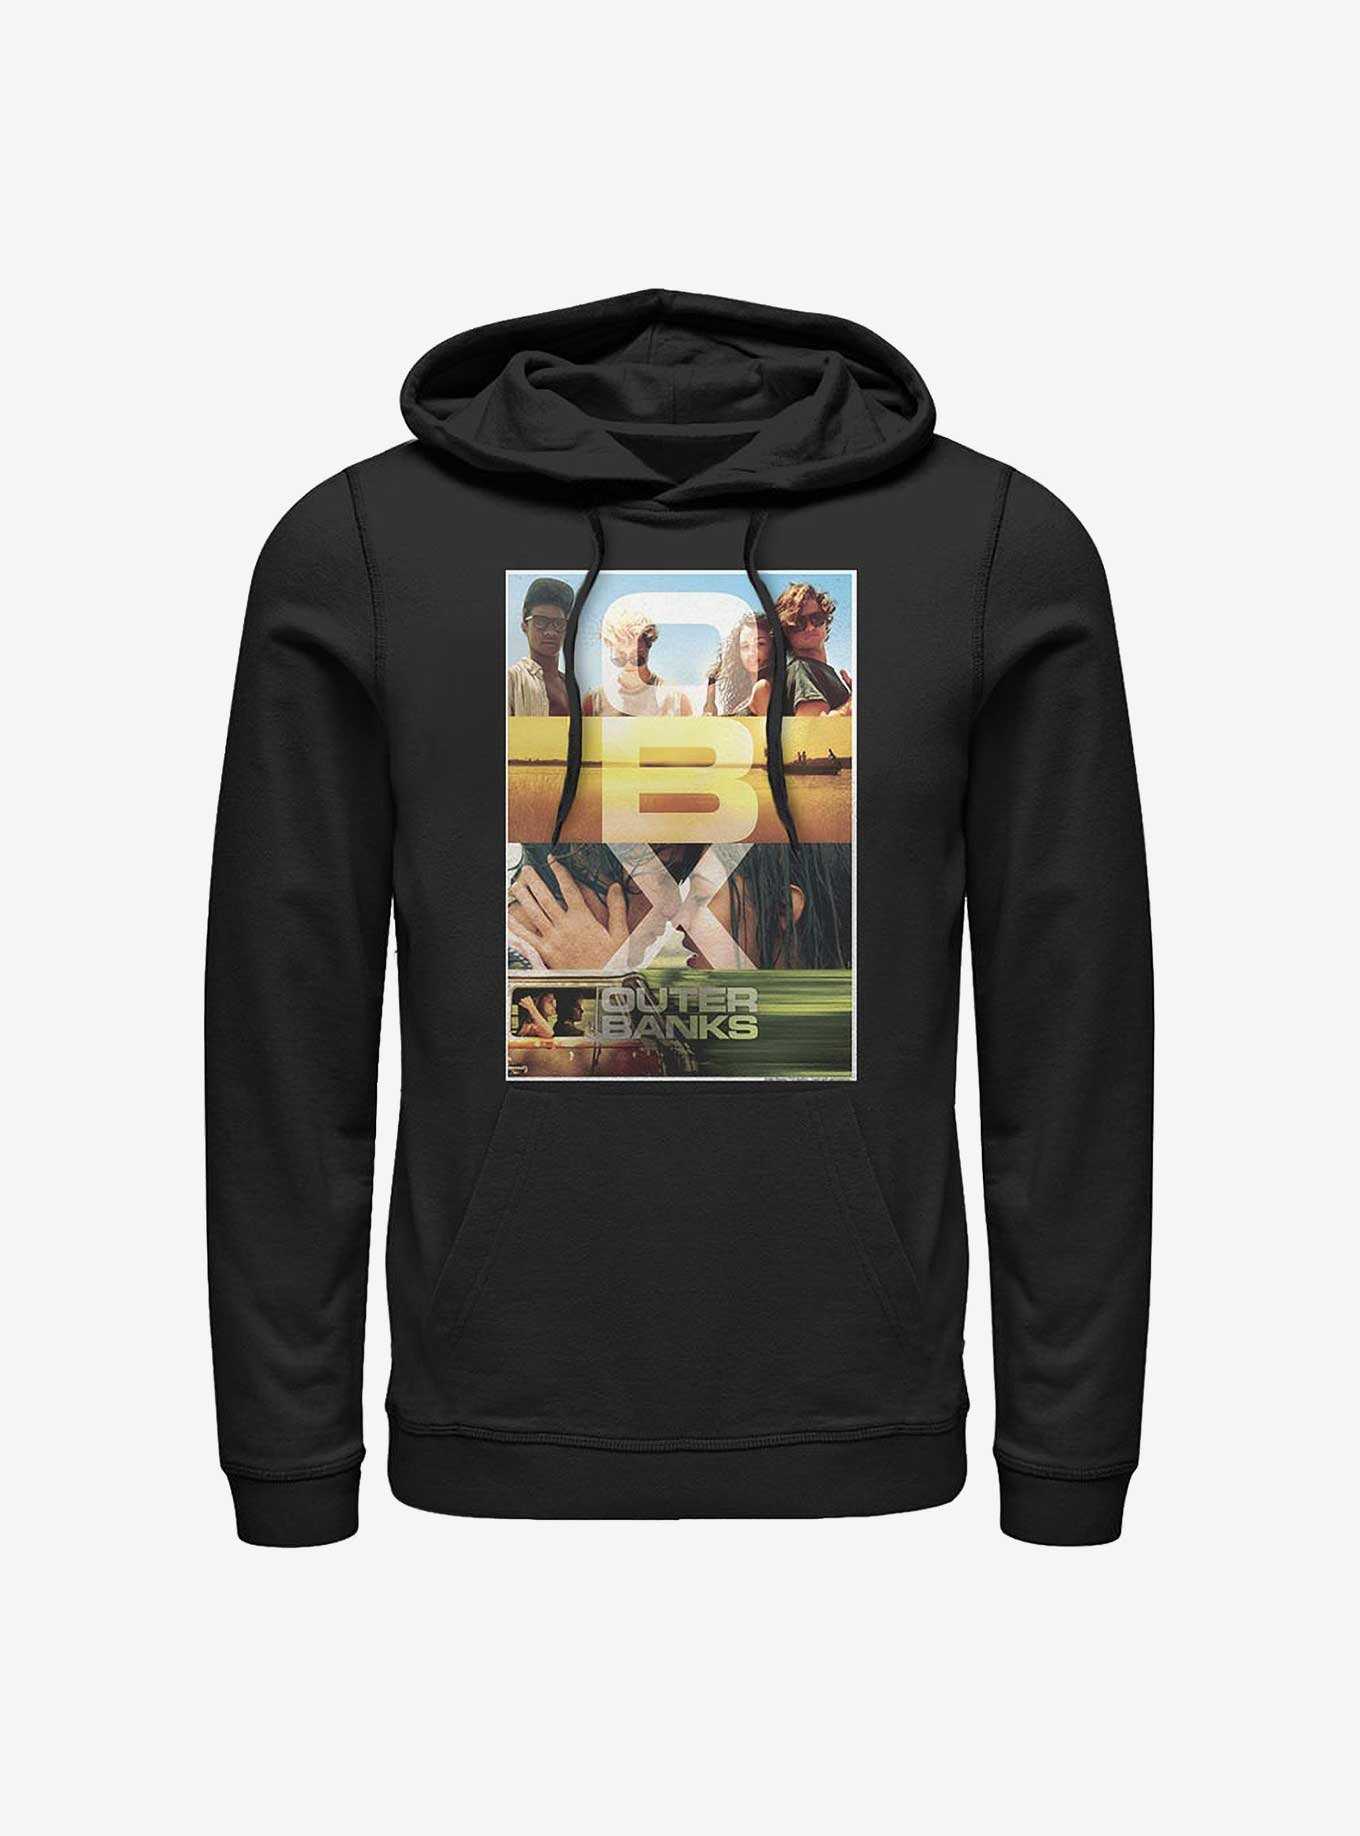 Outer Banks OBX Poster Hoodie, , hi-res